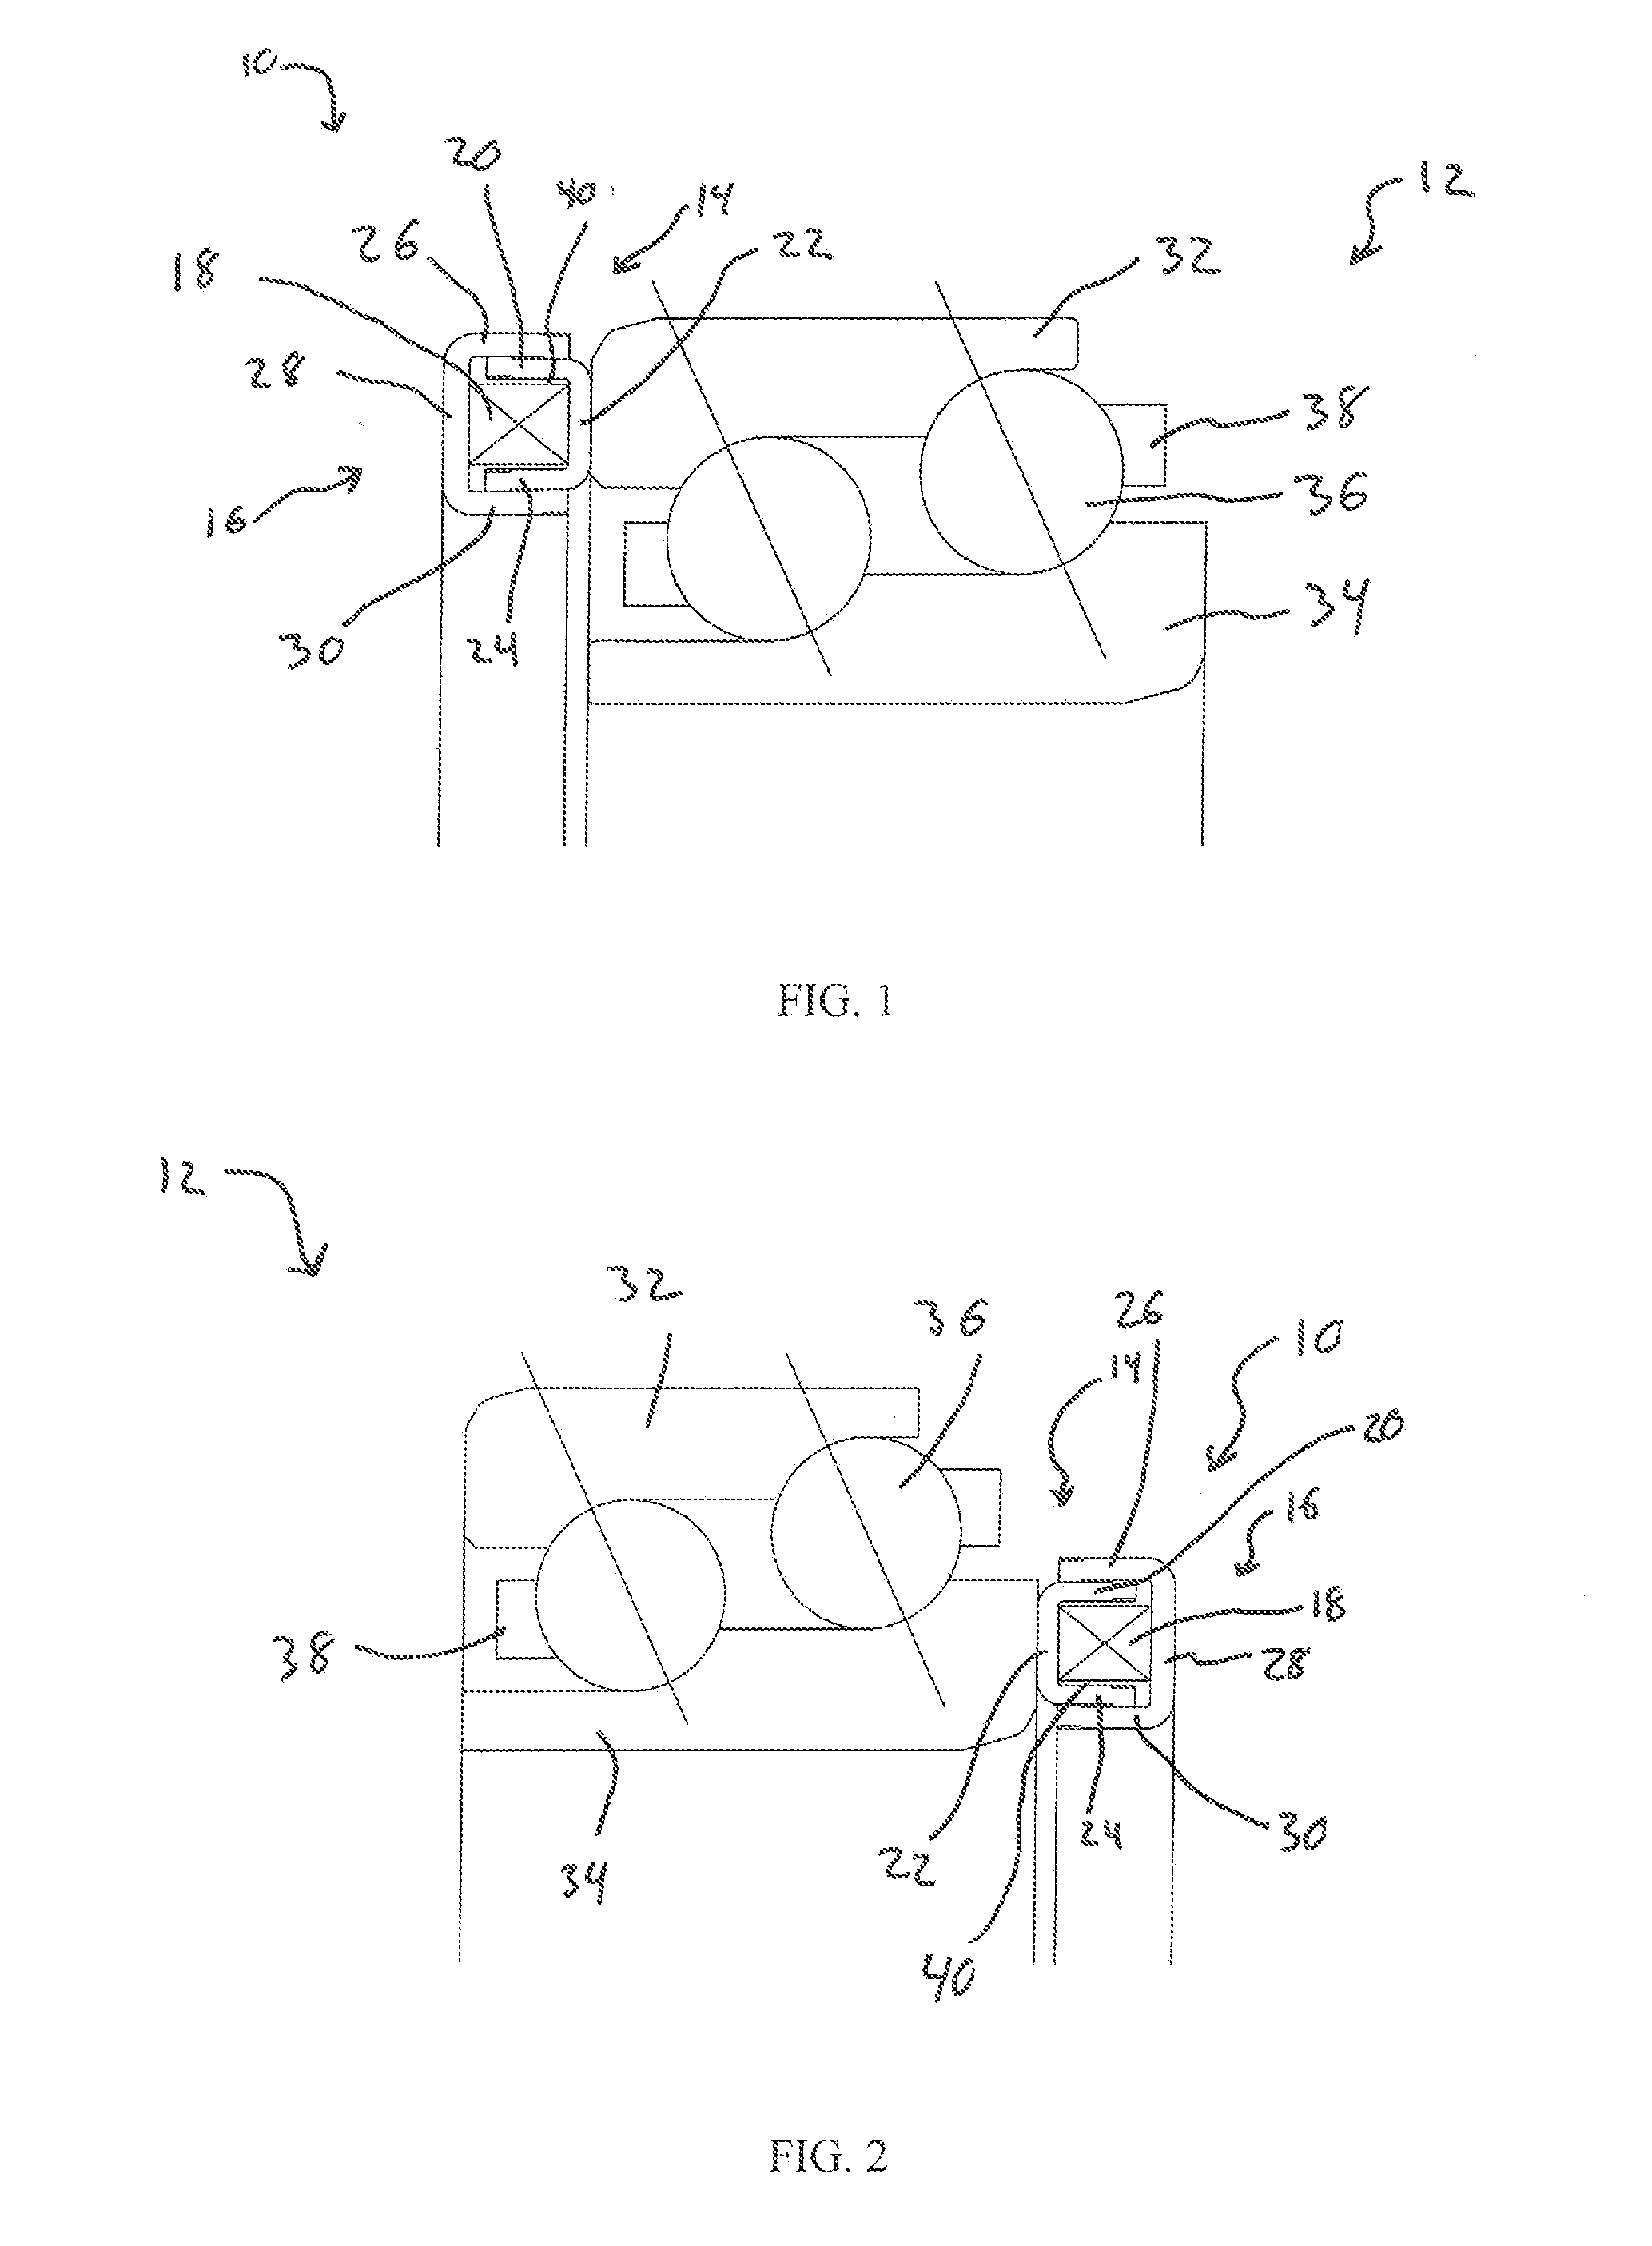 Thermal compensation element with wave spring